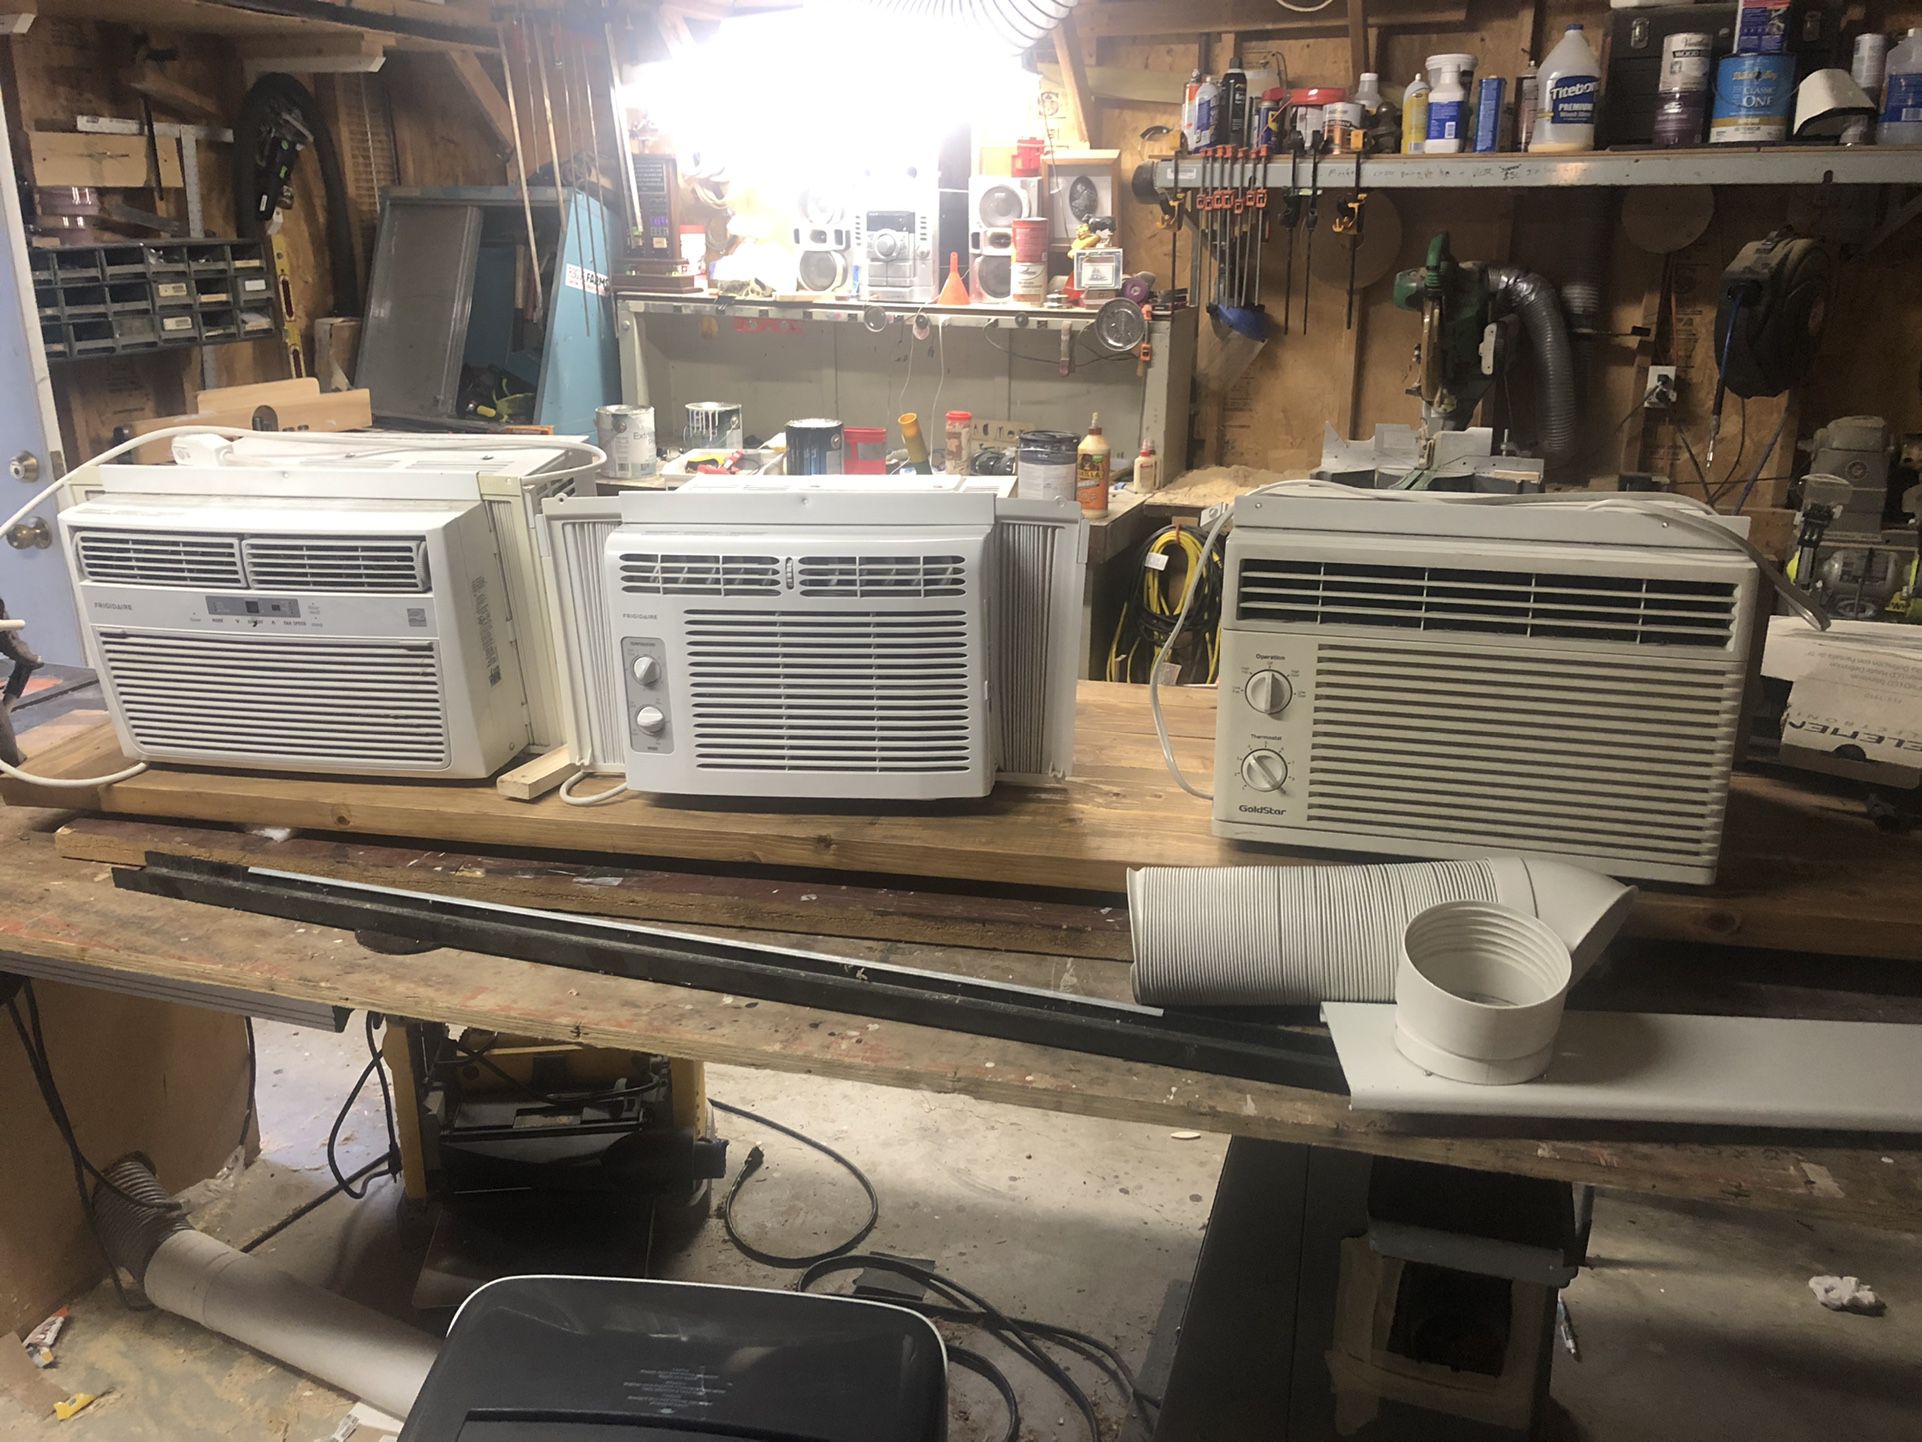 4 AC Air Condition Units All Work Great